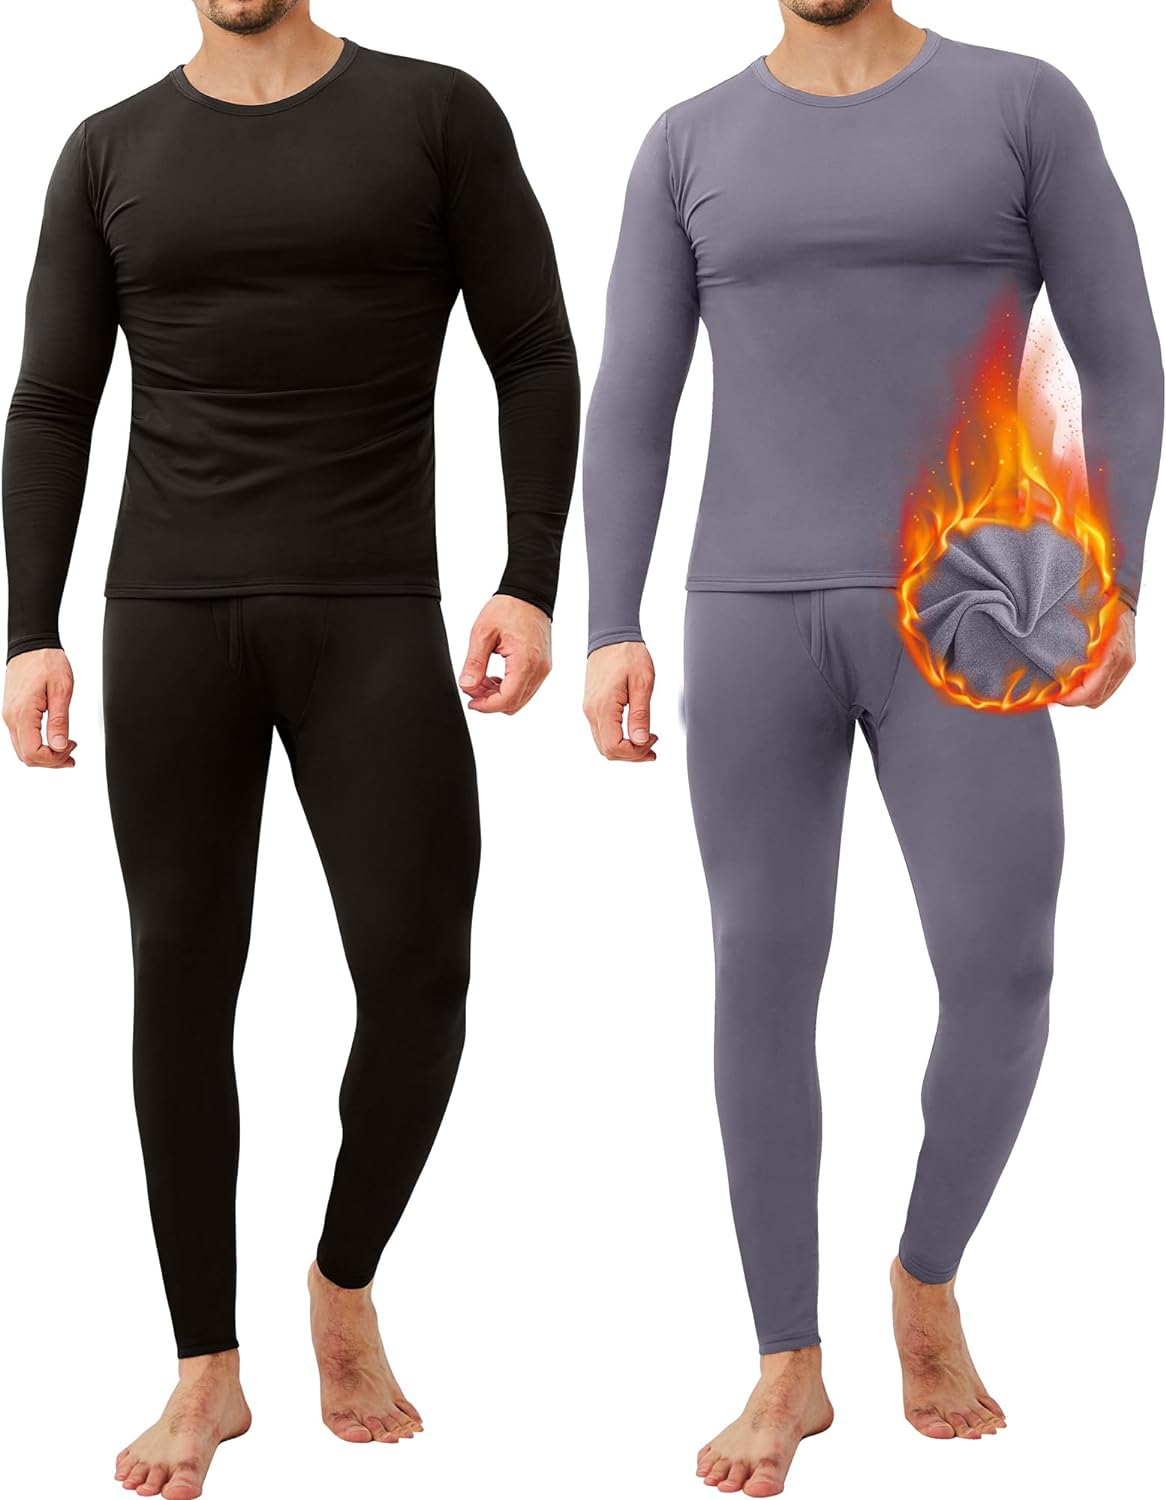 CL convallaria 2 Pack Long Johns Thermal Underwear for Men Soft Fleece  Lined Bas